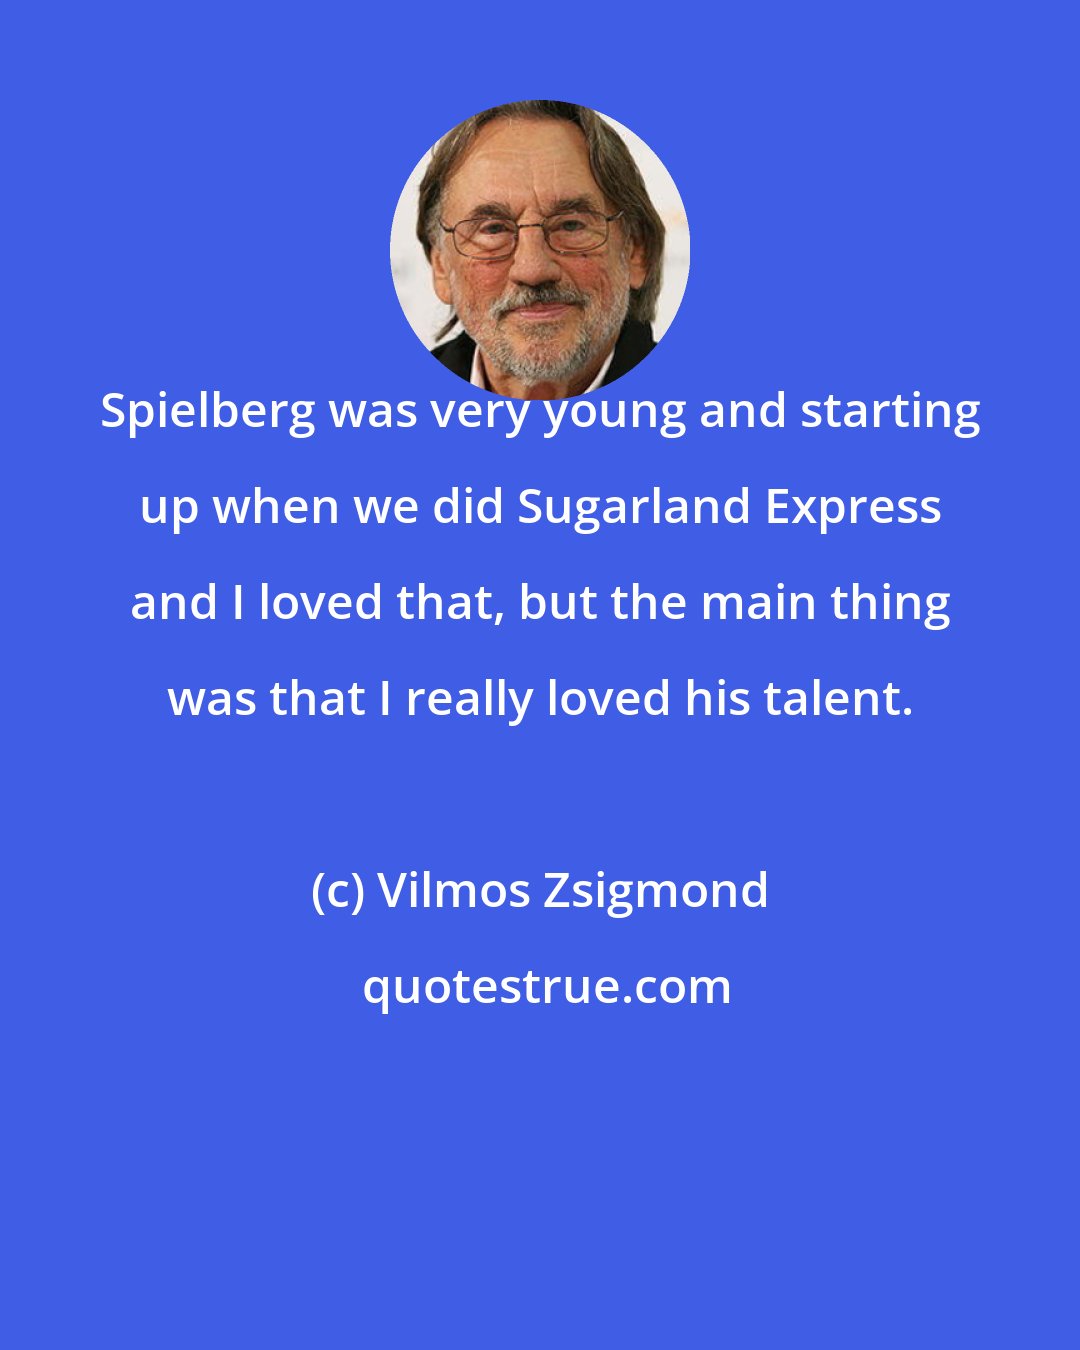 Vilmos Zsigmond: Spielberg was very young and starting up when we did Sugarland Express and I loved that, but the main thing was that I really loved his talent.